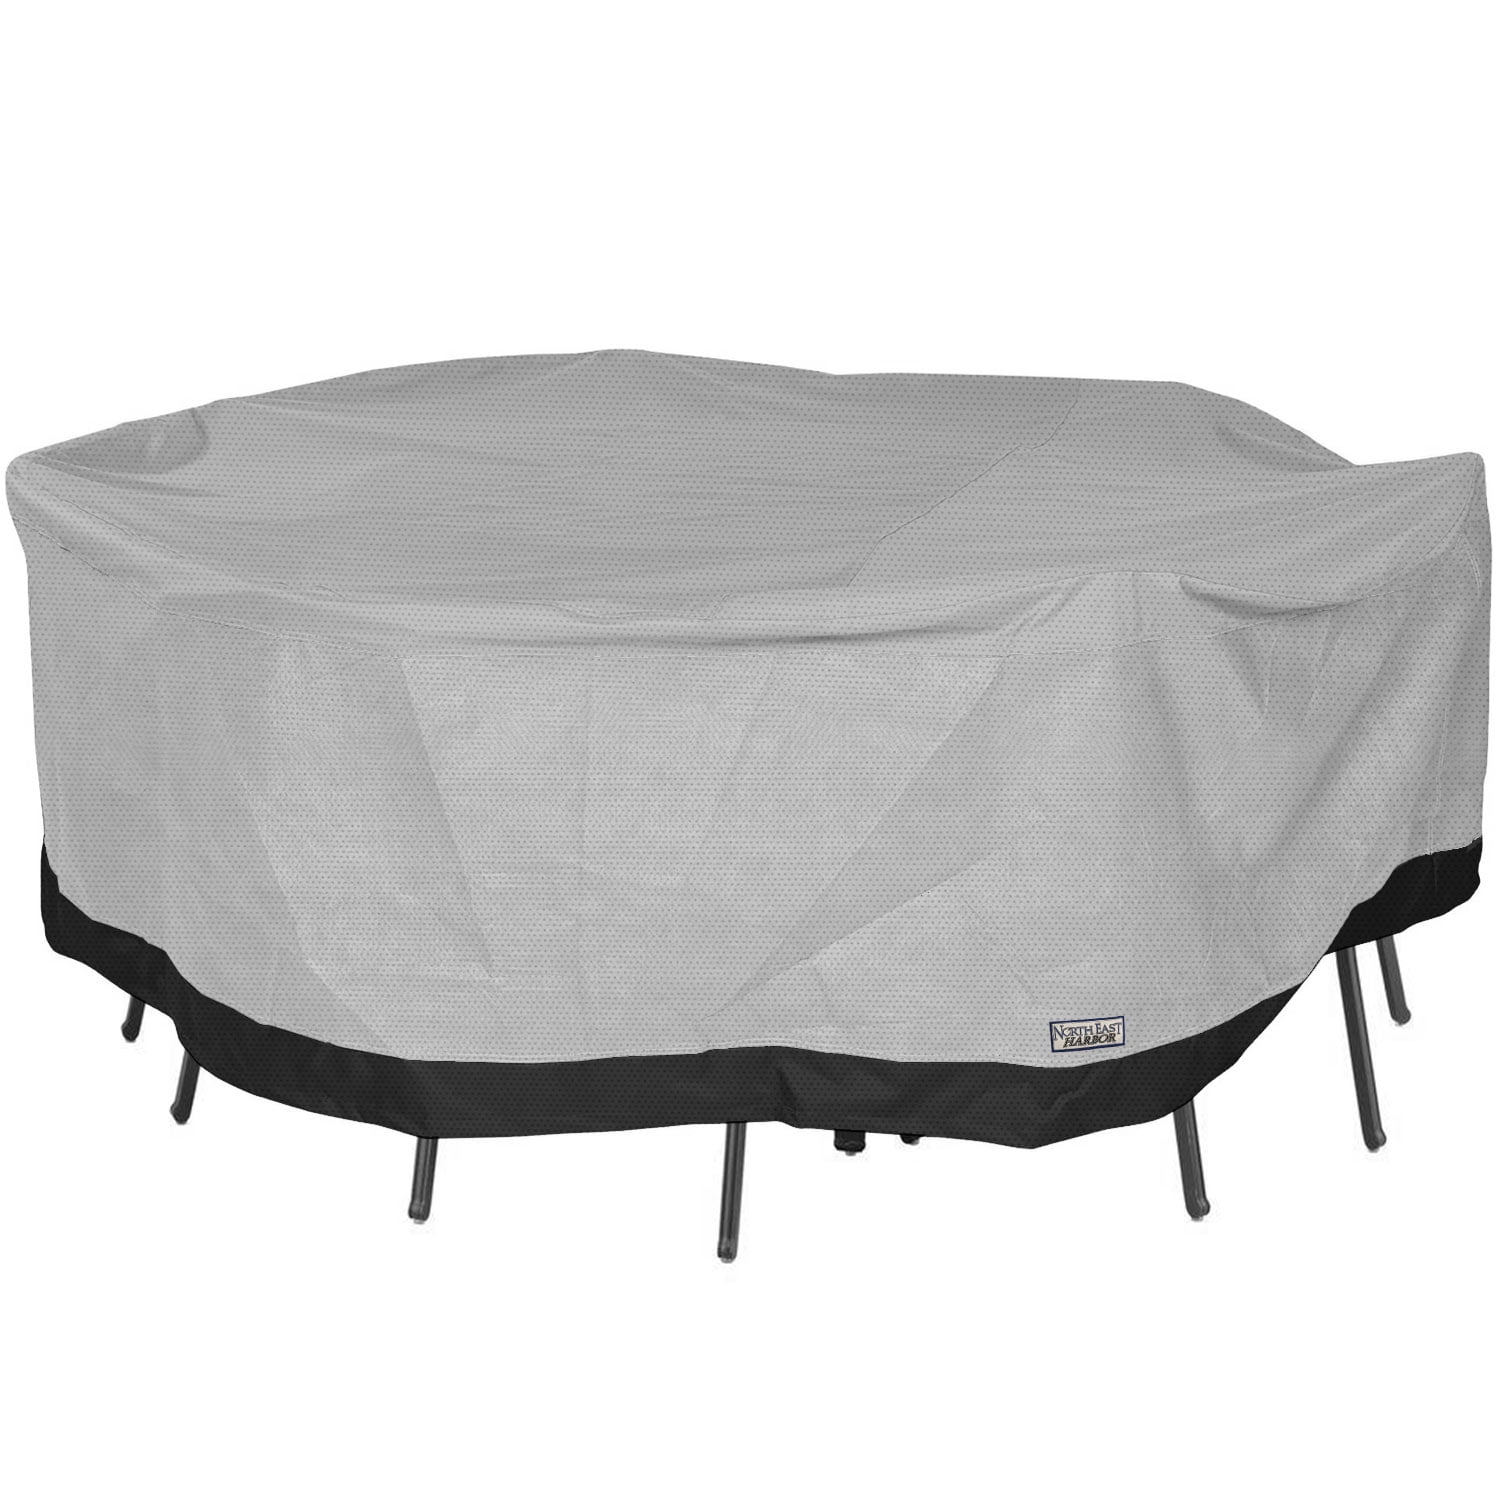 White KoverRoos DuPont Tyvek 24242 60-Inch Round Table Dining Set Cover 78-Inch Diameter by 38-Inch Height